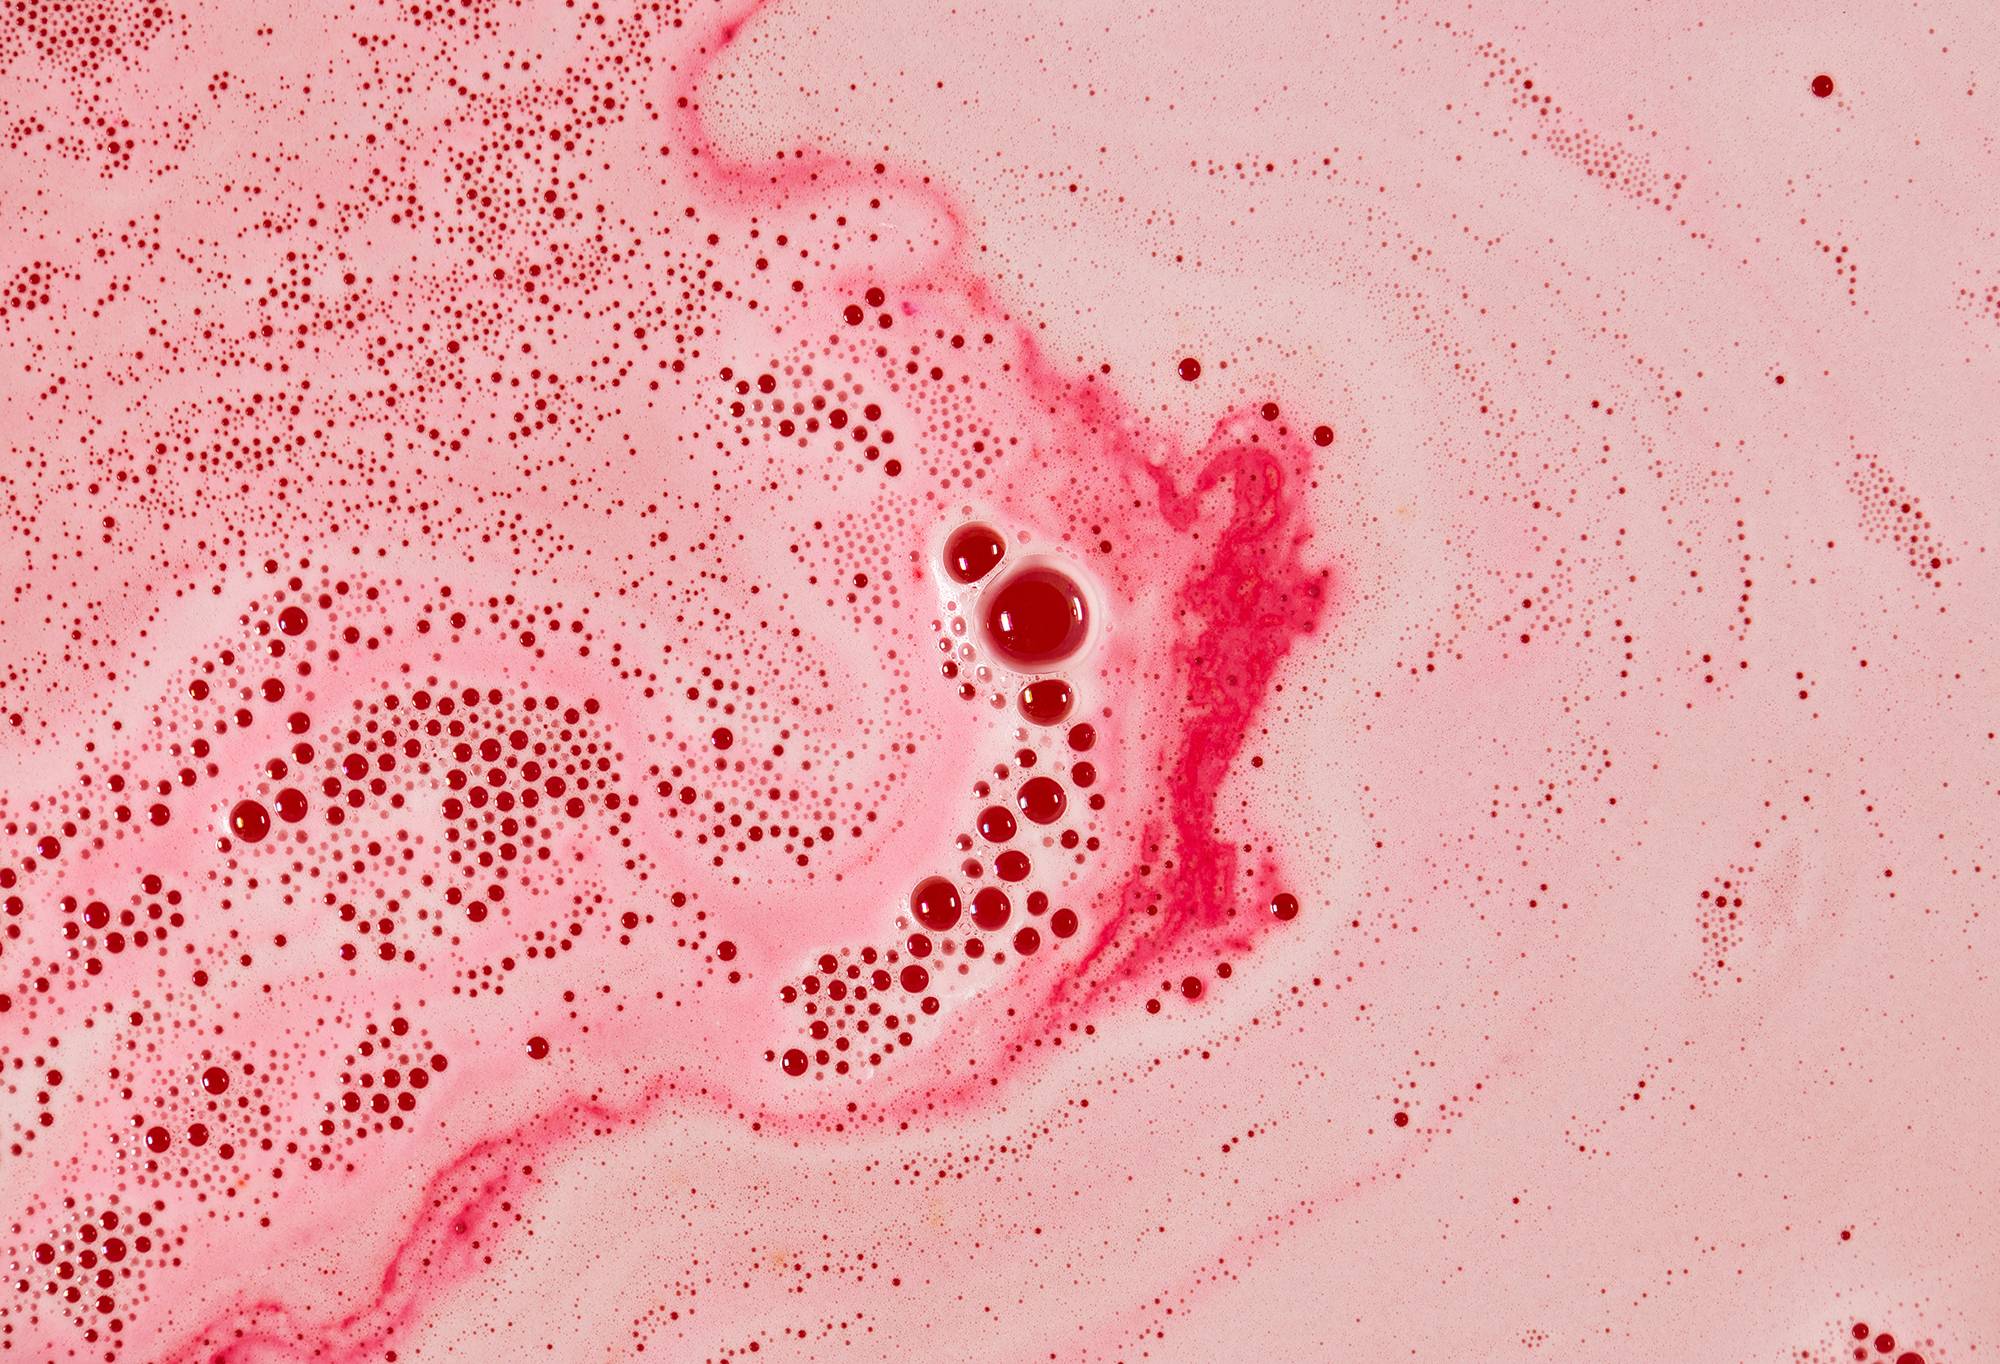 Sweet Pudding bath bomb has fully dissolved leaving behind a thick sea of velvety foam in shades of pink.